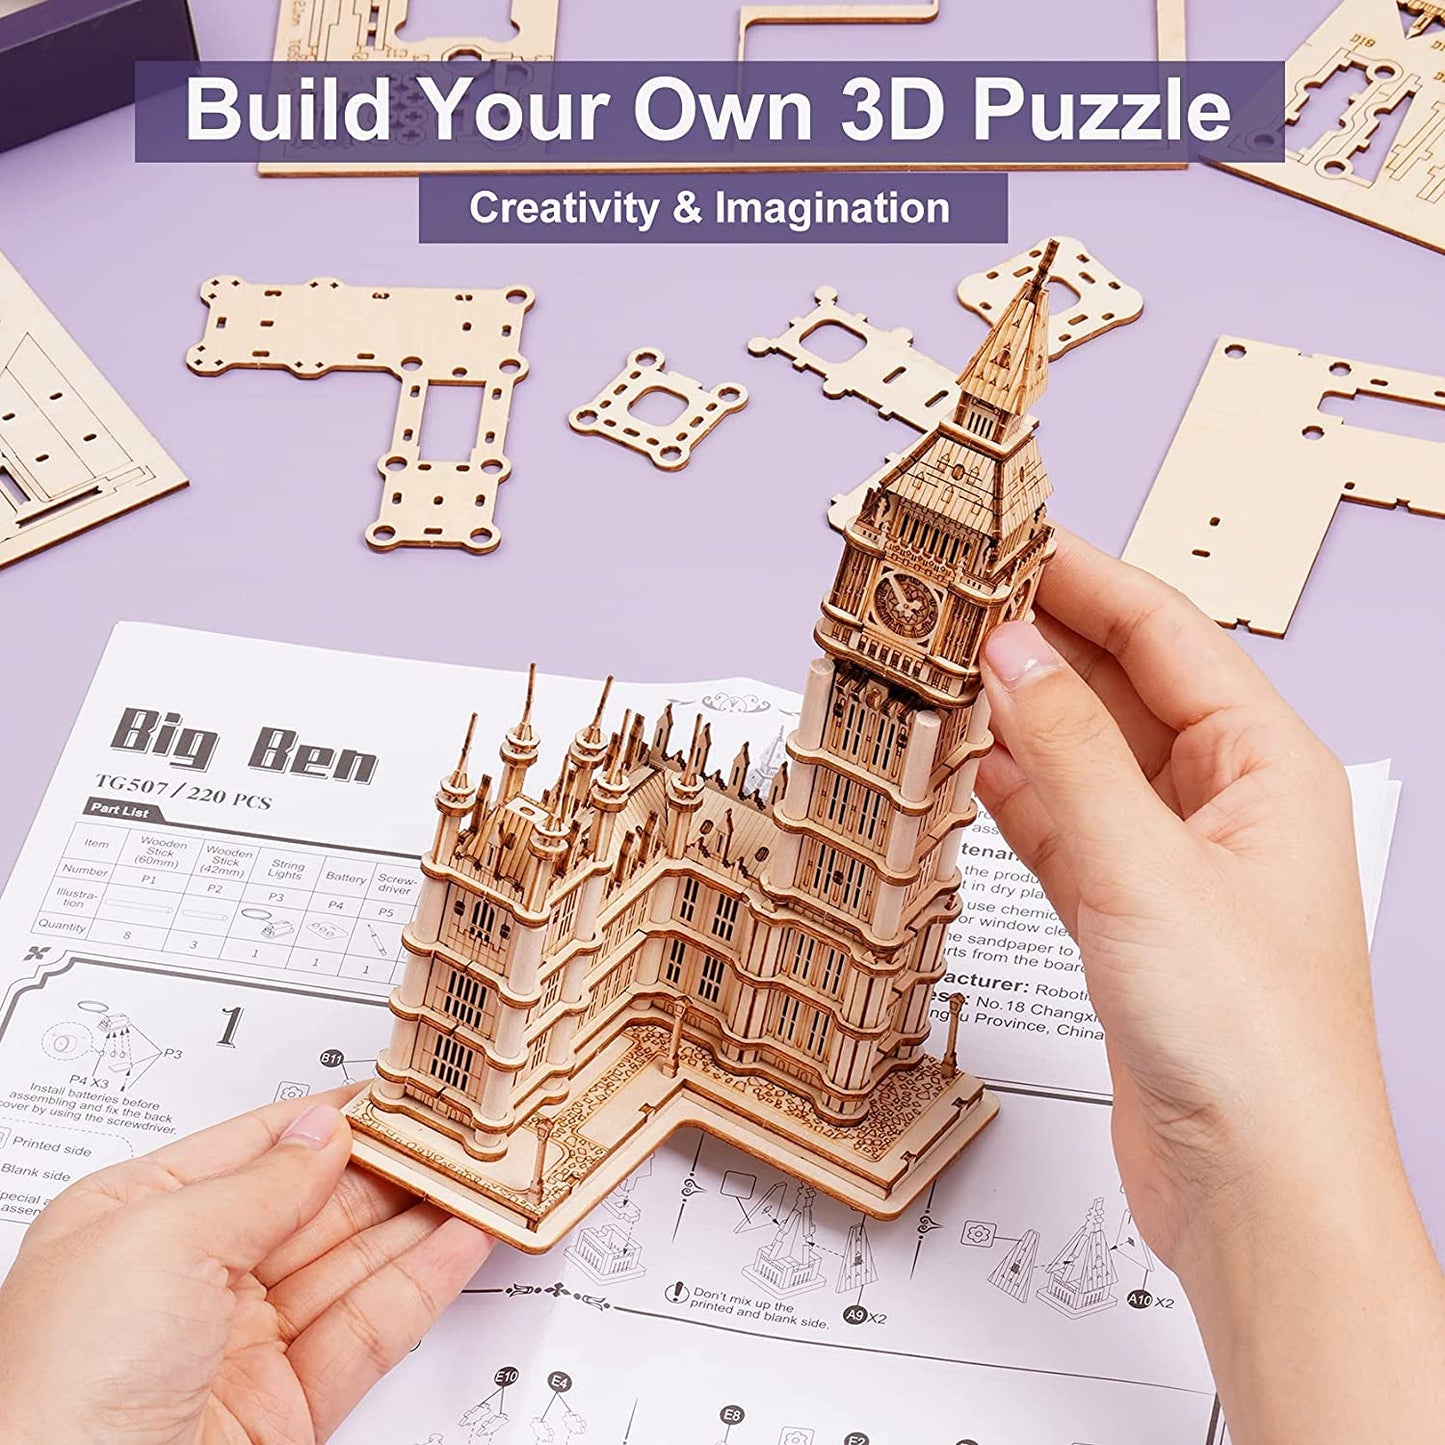 3D Puzzle for Adults Wooden Craft Kits for Teens DIY Construction Model Kit with LED Light to Build Educational Big Ben Set Toys